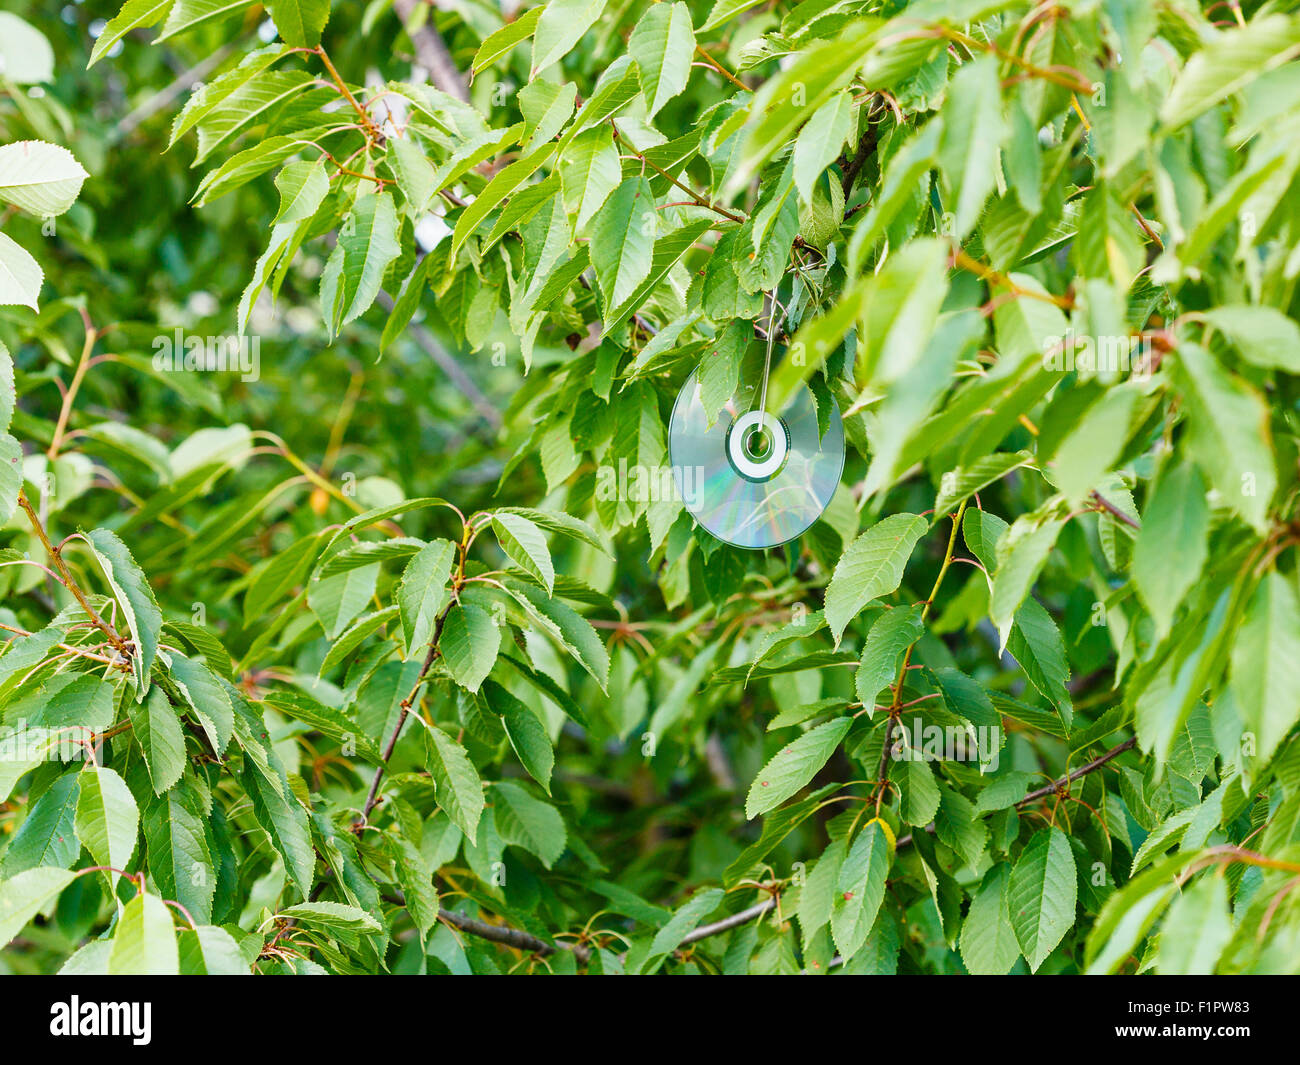 shiny compact disc on black cherry tree to scare birds in orchard Stock Photo